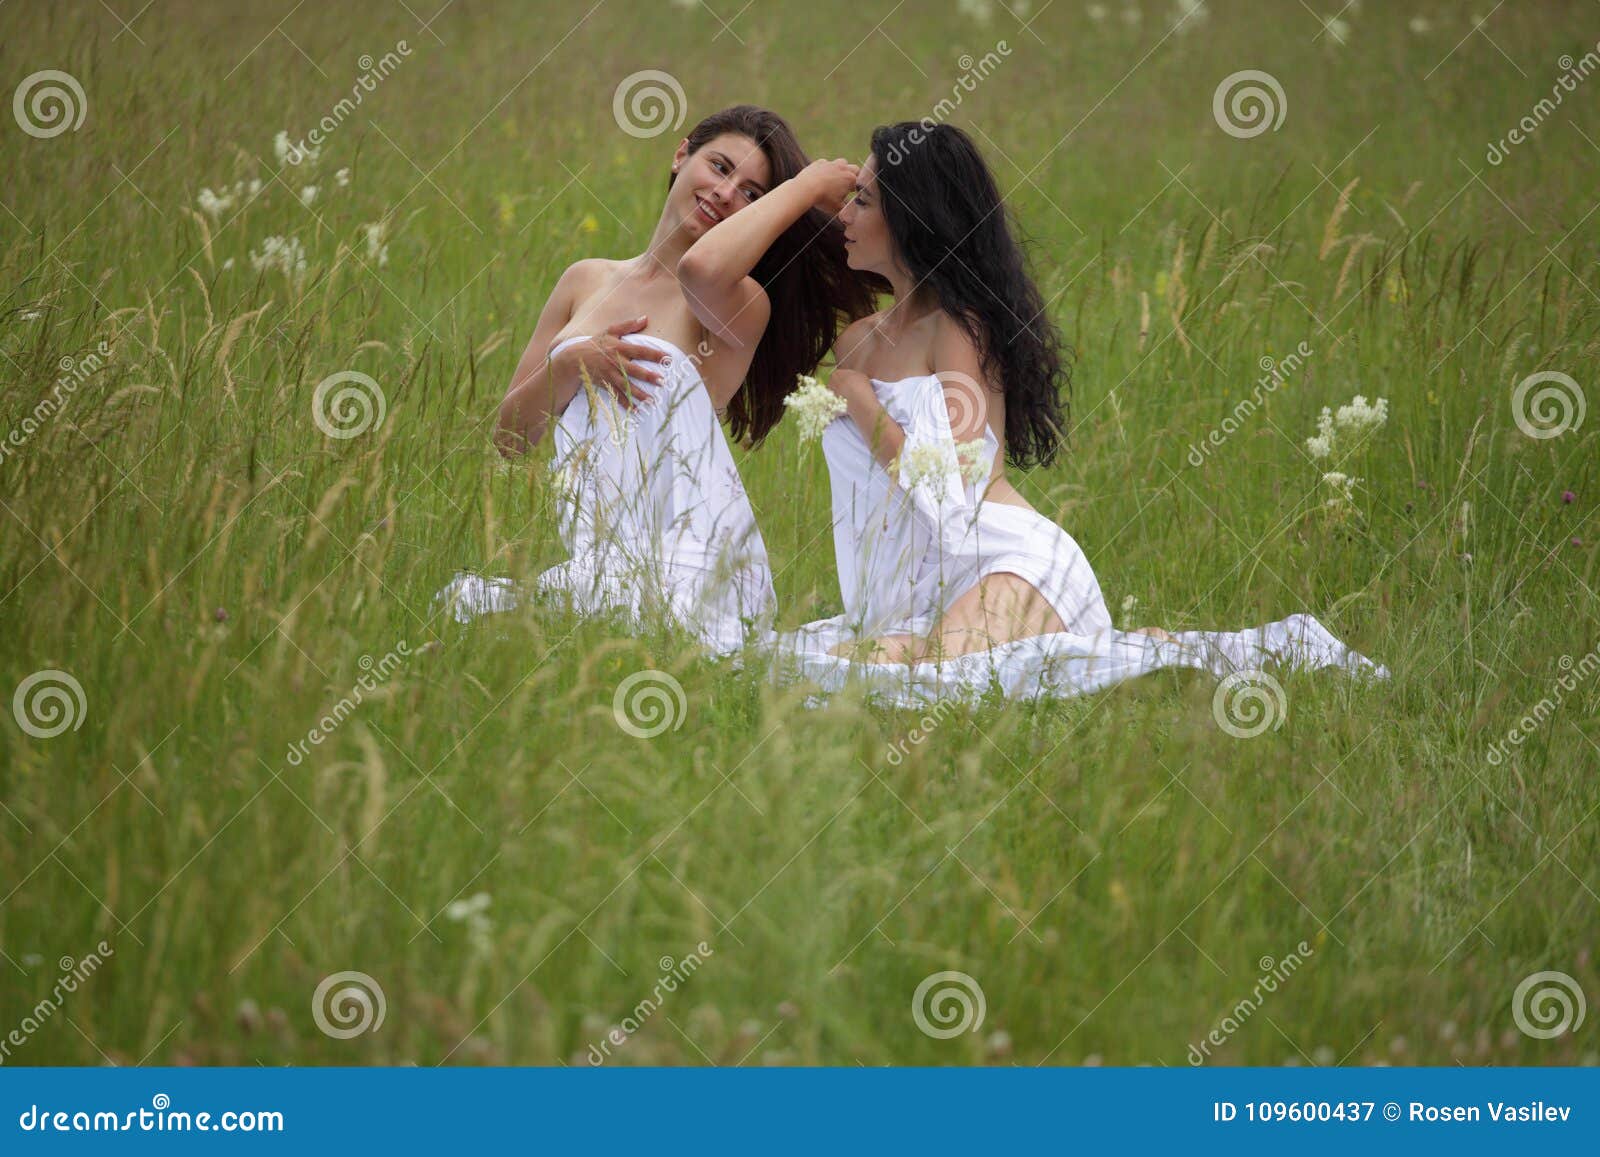 Hjemland Jernbanestation biord Portrait of Two Woman in Nature. Stock Image - Image of outdoor,  friendship: 109600437